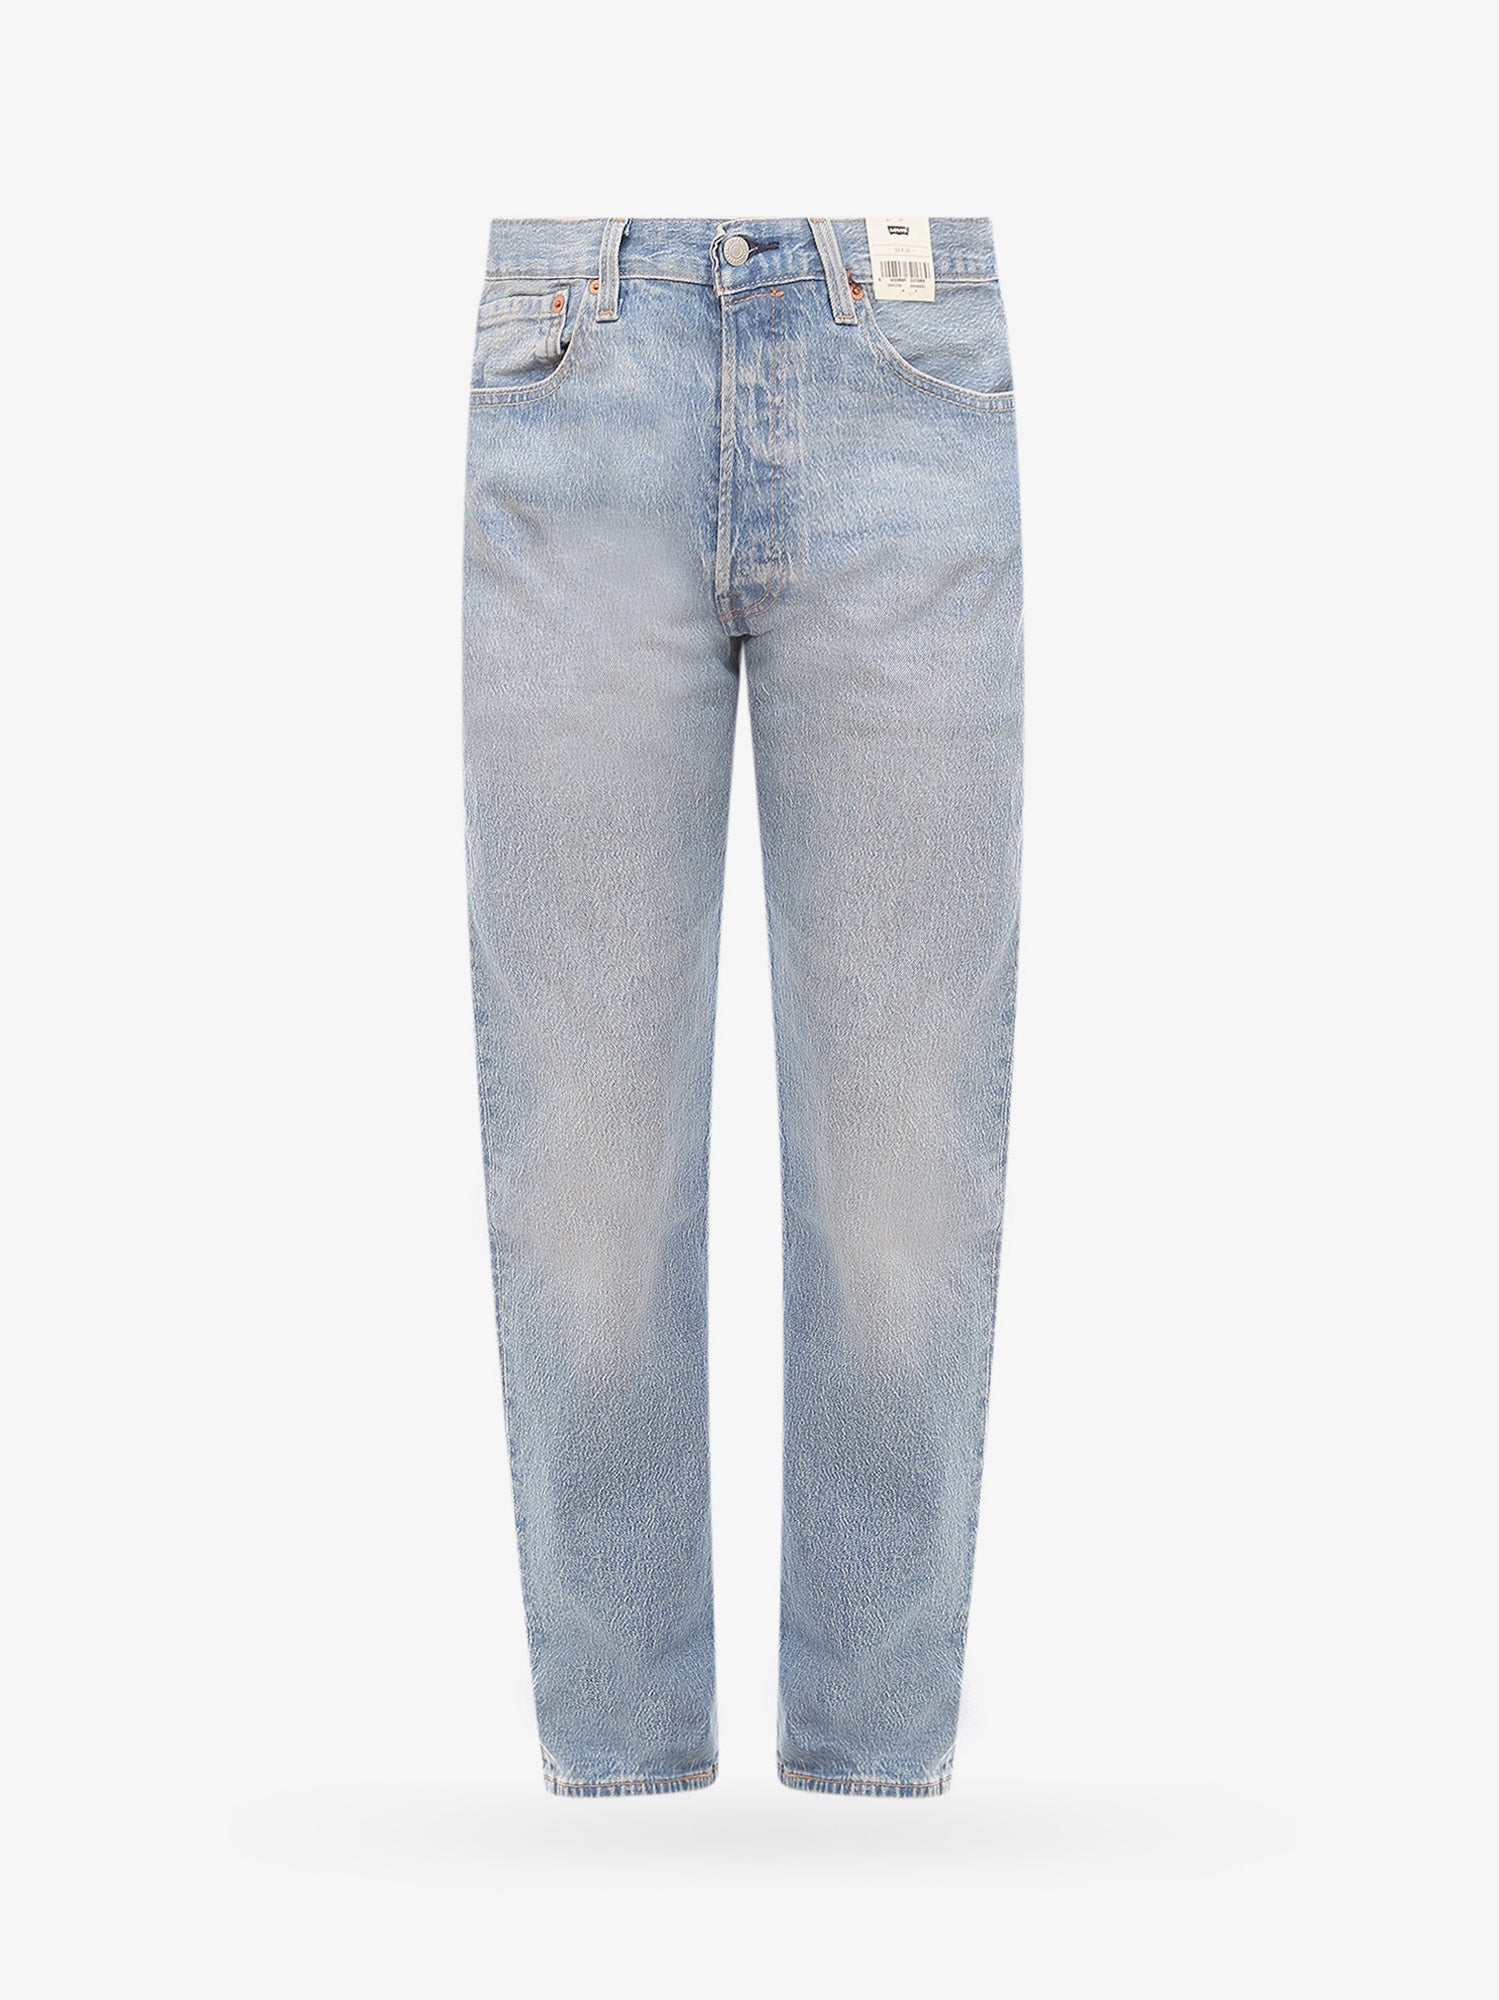 Levi's 501 In Blue